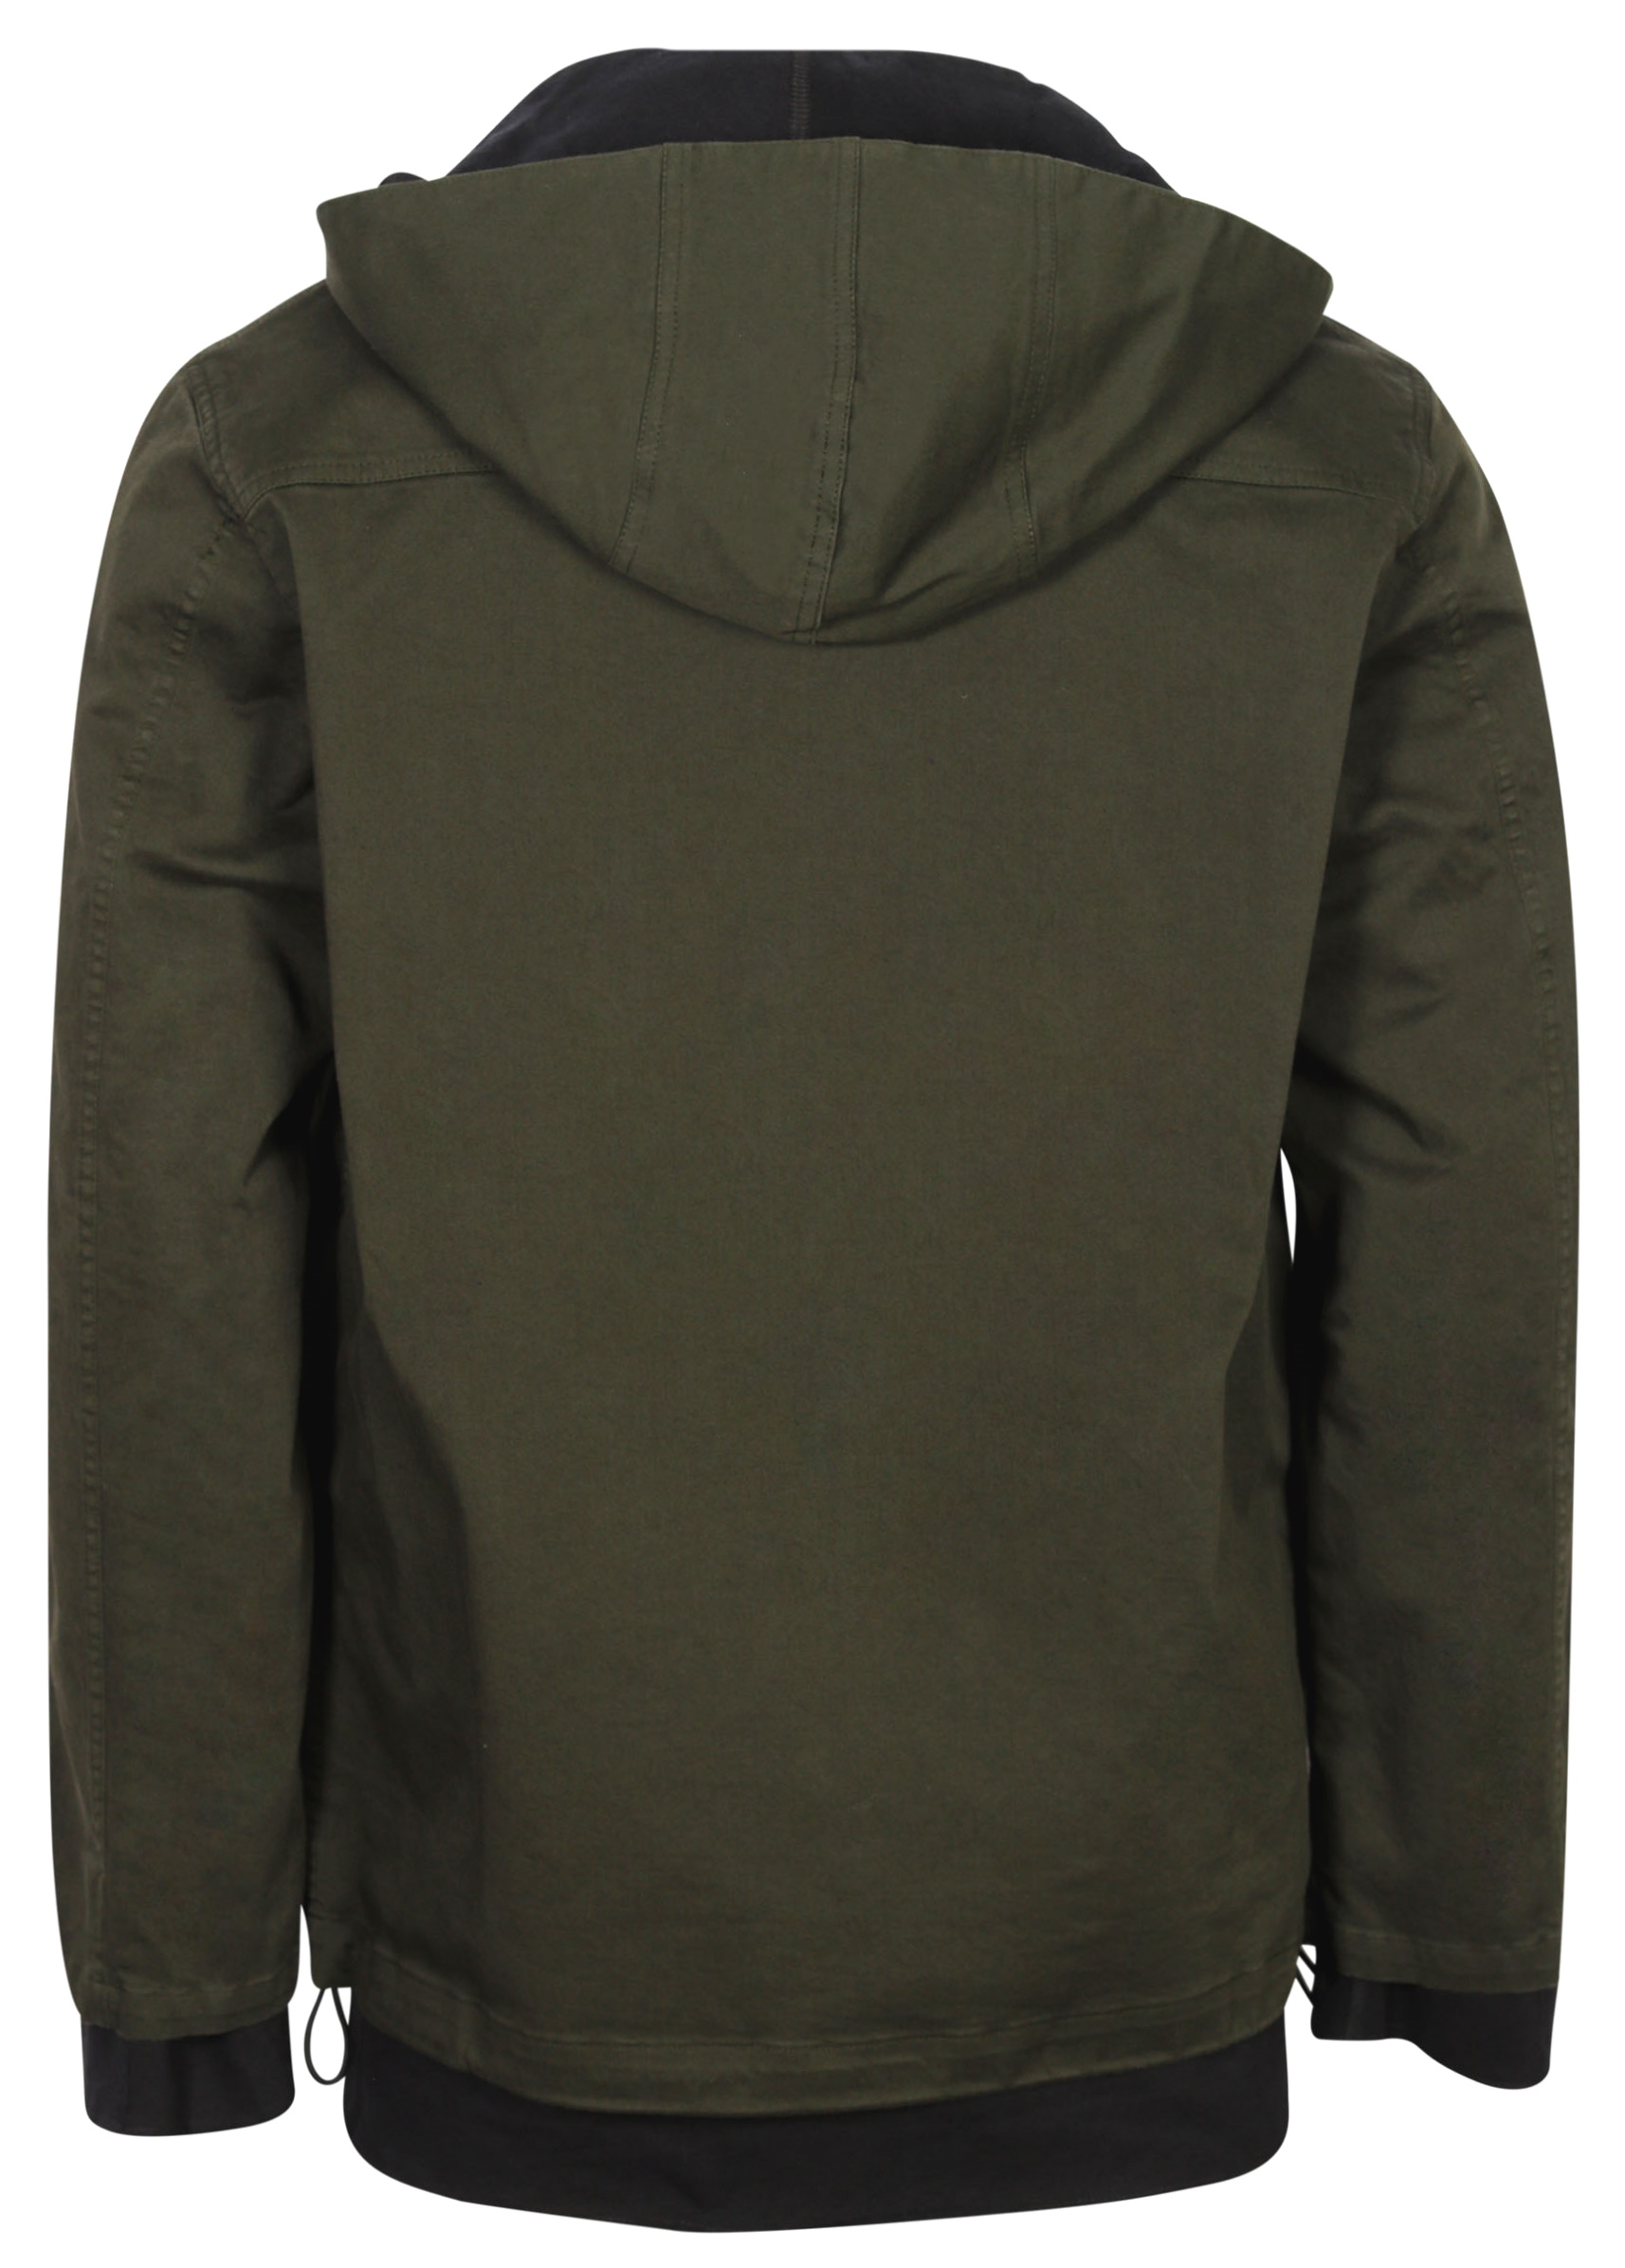 Hannes Roether Cotton Jacket With Removable Inner Hooded Sweatjacket Darkgreen